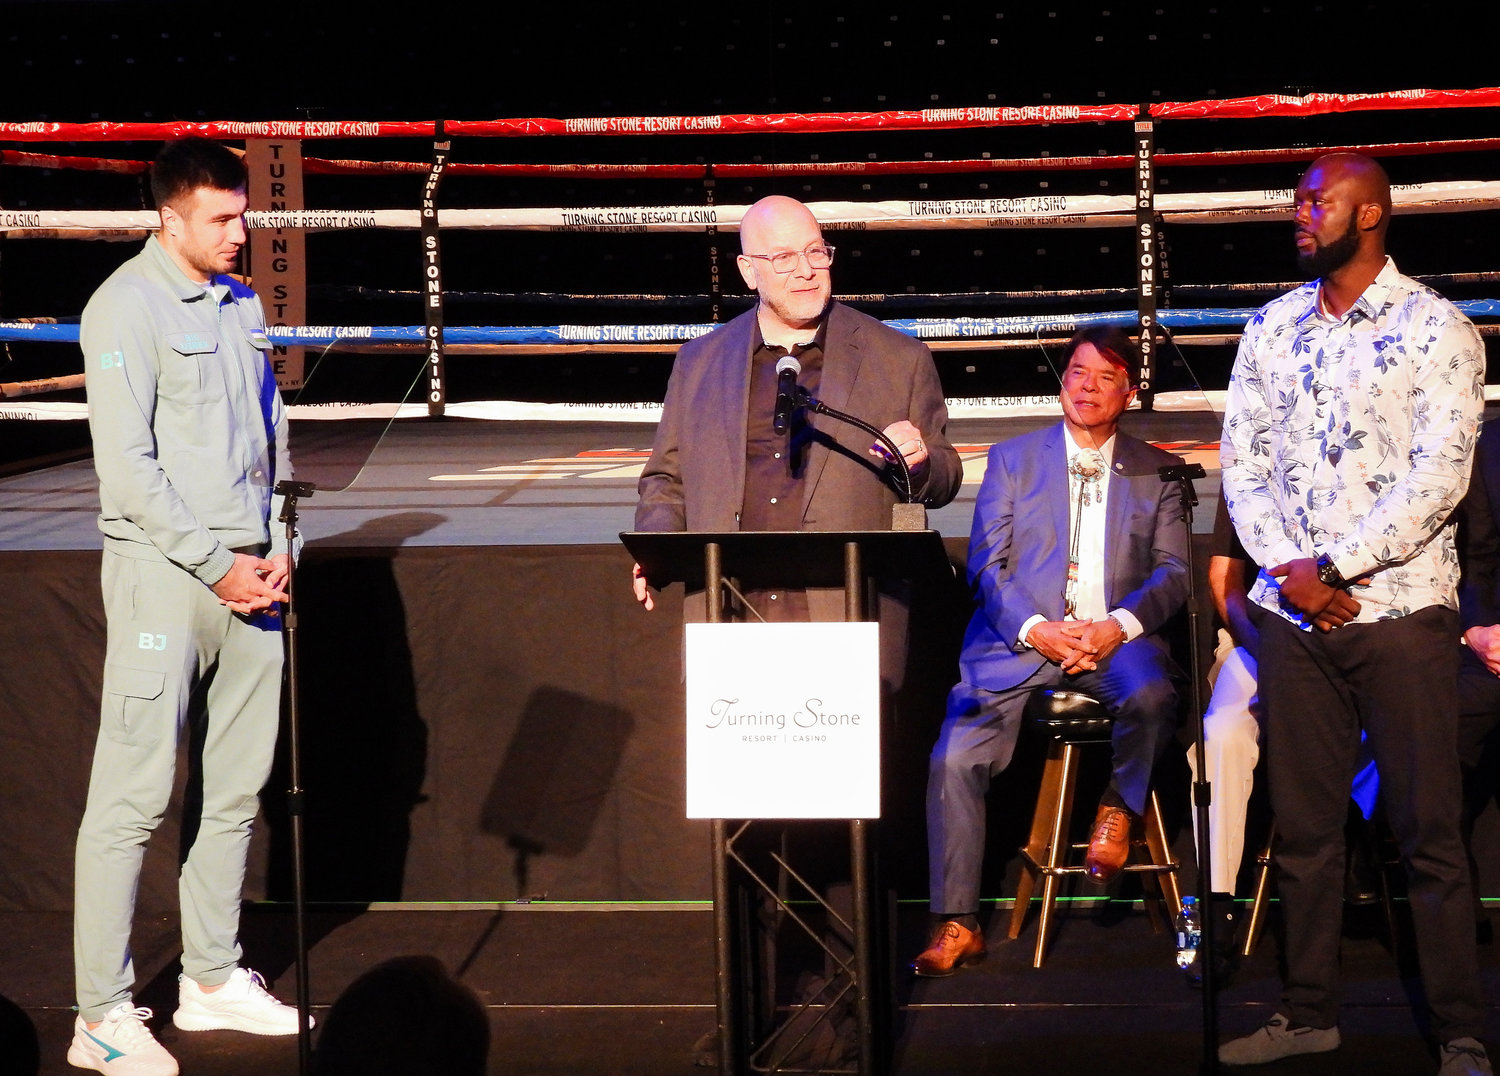 Boxing promoter Lou DiBella, center, talks about the upcoming fight between Bakhodir Jalolov a.k.a “The Big Uzbek,” left, and Jack Mulowayi at a press conference on Thursday kicking off the Hall of Fame Weekend Induction.